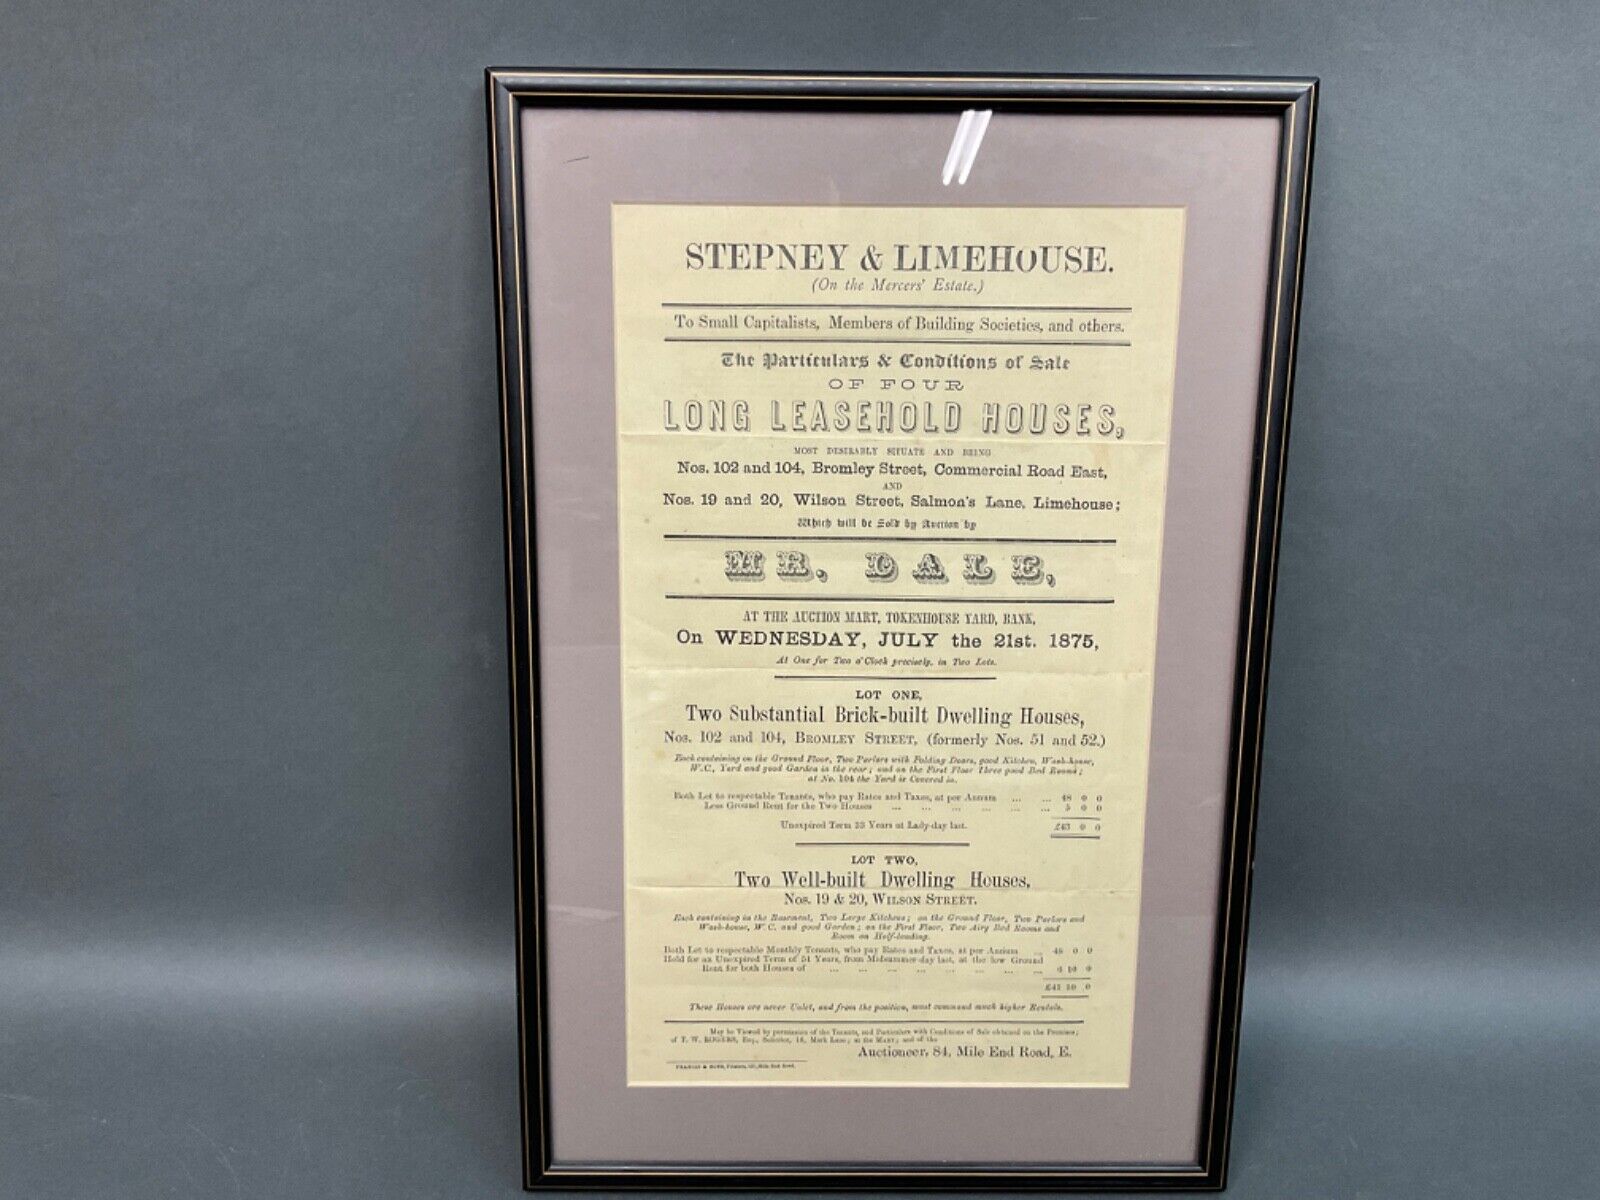 Original 1875 Broadside Poster for Auction Sale of 4 Dwellings House properties 